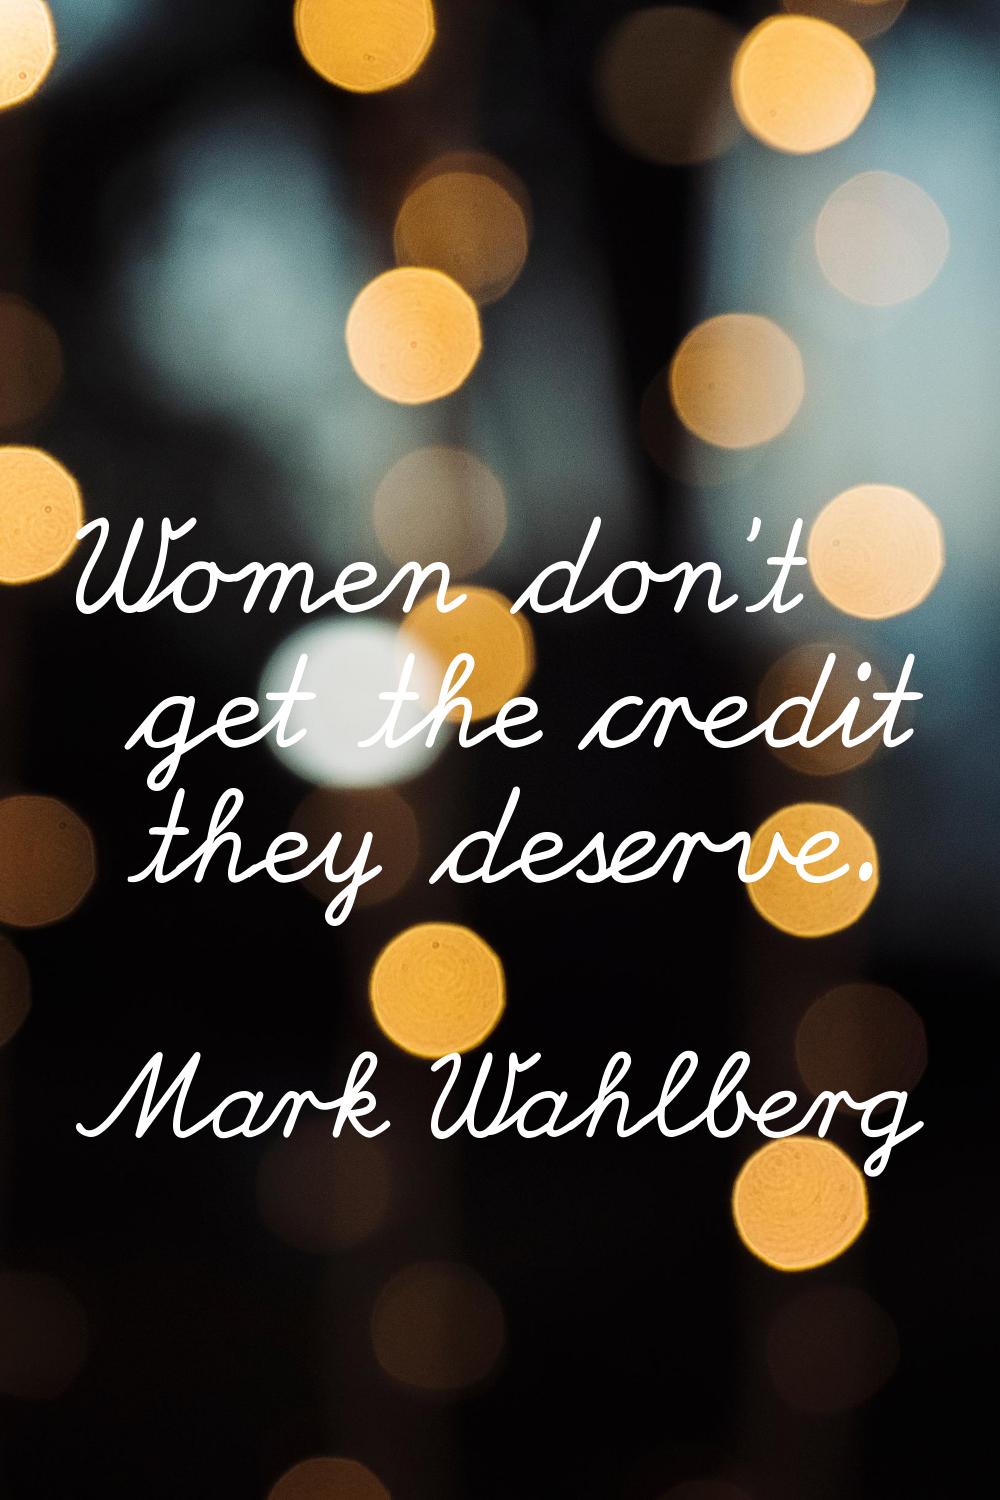 Women don't get the credit they deserve.